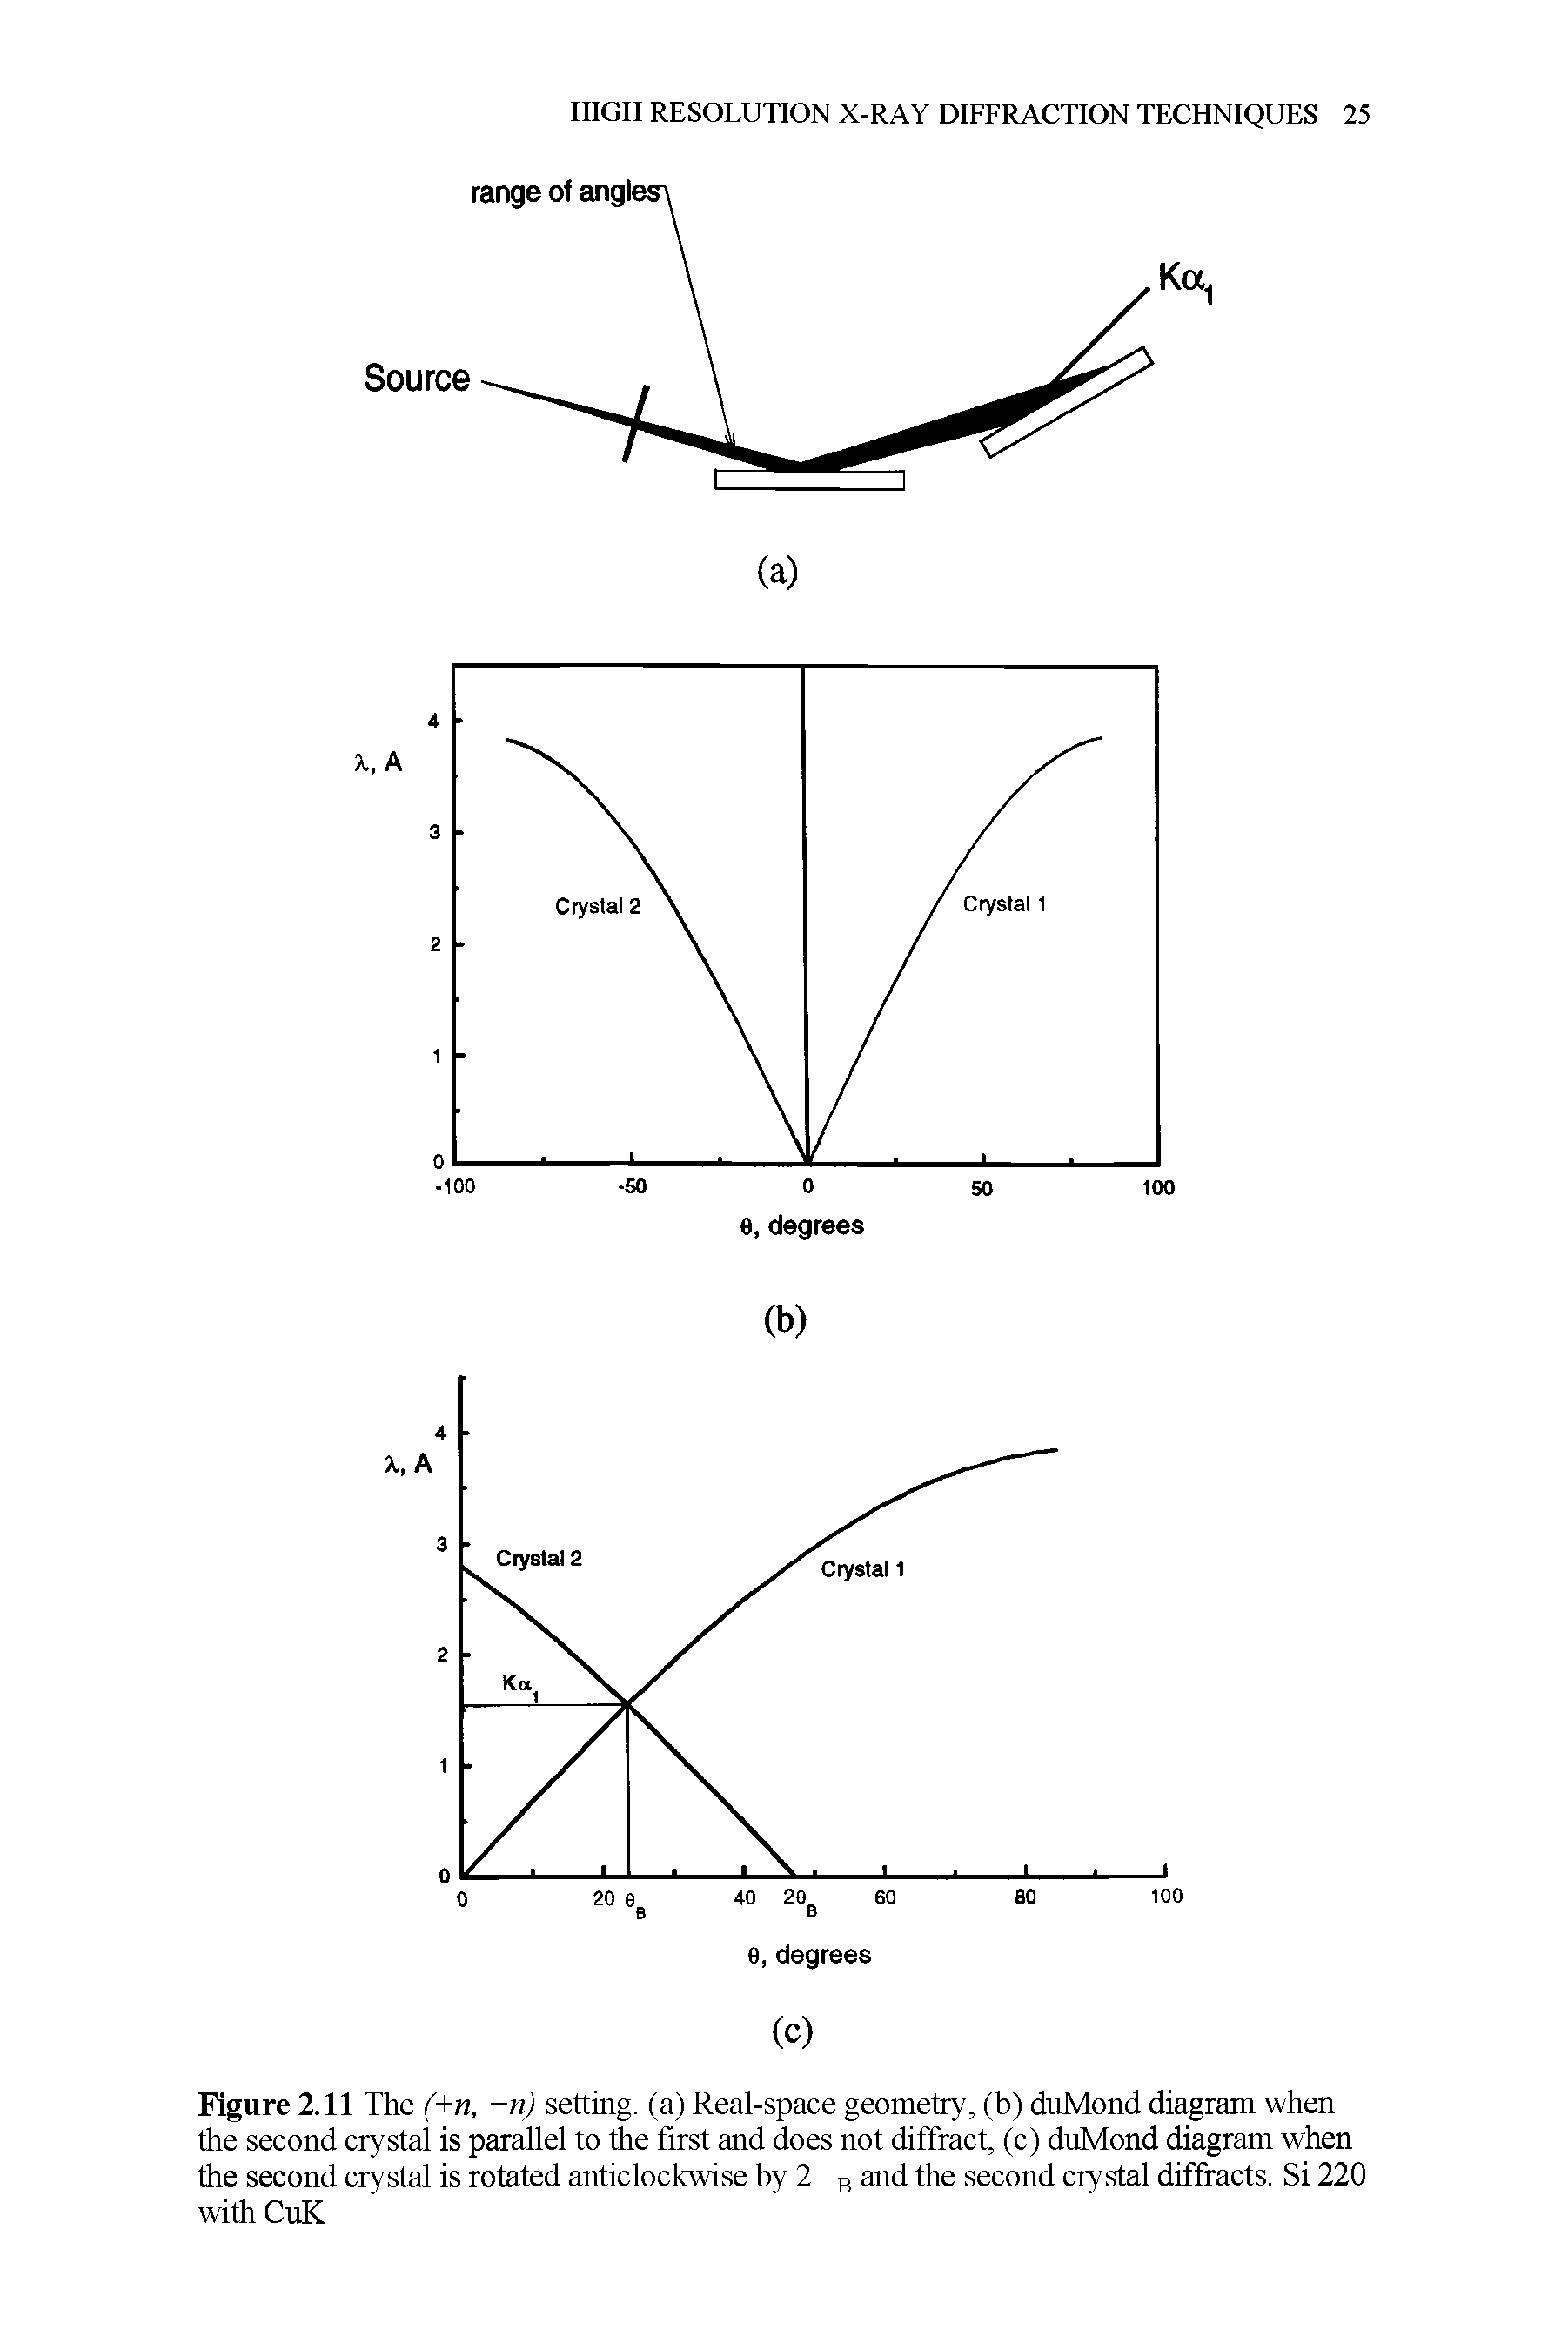 Figure 2.11 The (+n, +n) setting, (a) Real-space geometry, (b) duMond diagram when the second crystal is parallel to the first and does not diffract, (c) duMond diagram when the second crystal is rotated anticlockwise by 2 b and the second crystal diffracts. Si 220 with CuK...